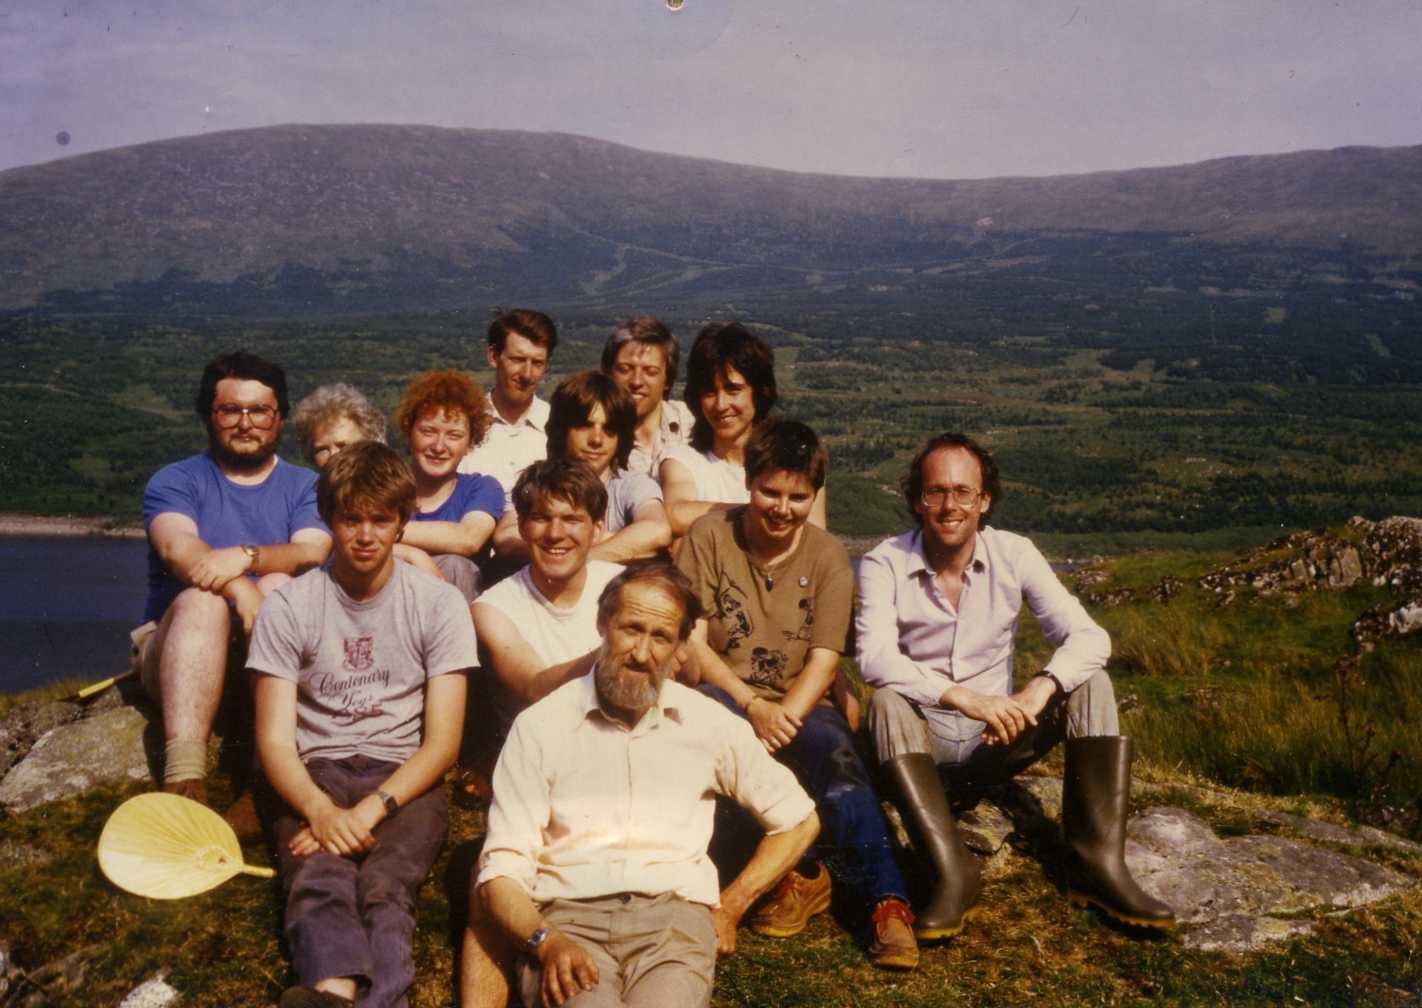 Team photo for archaeological dig investigating Mesolithic communities led by Tom Affleck at Loch Doon in 1985.